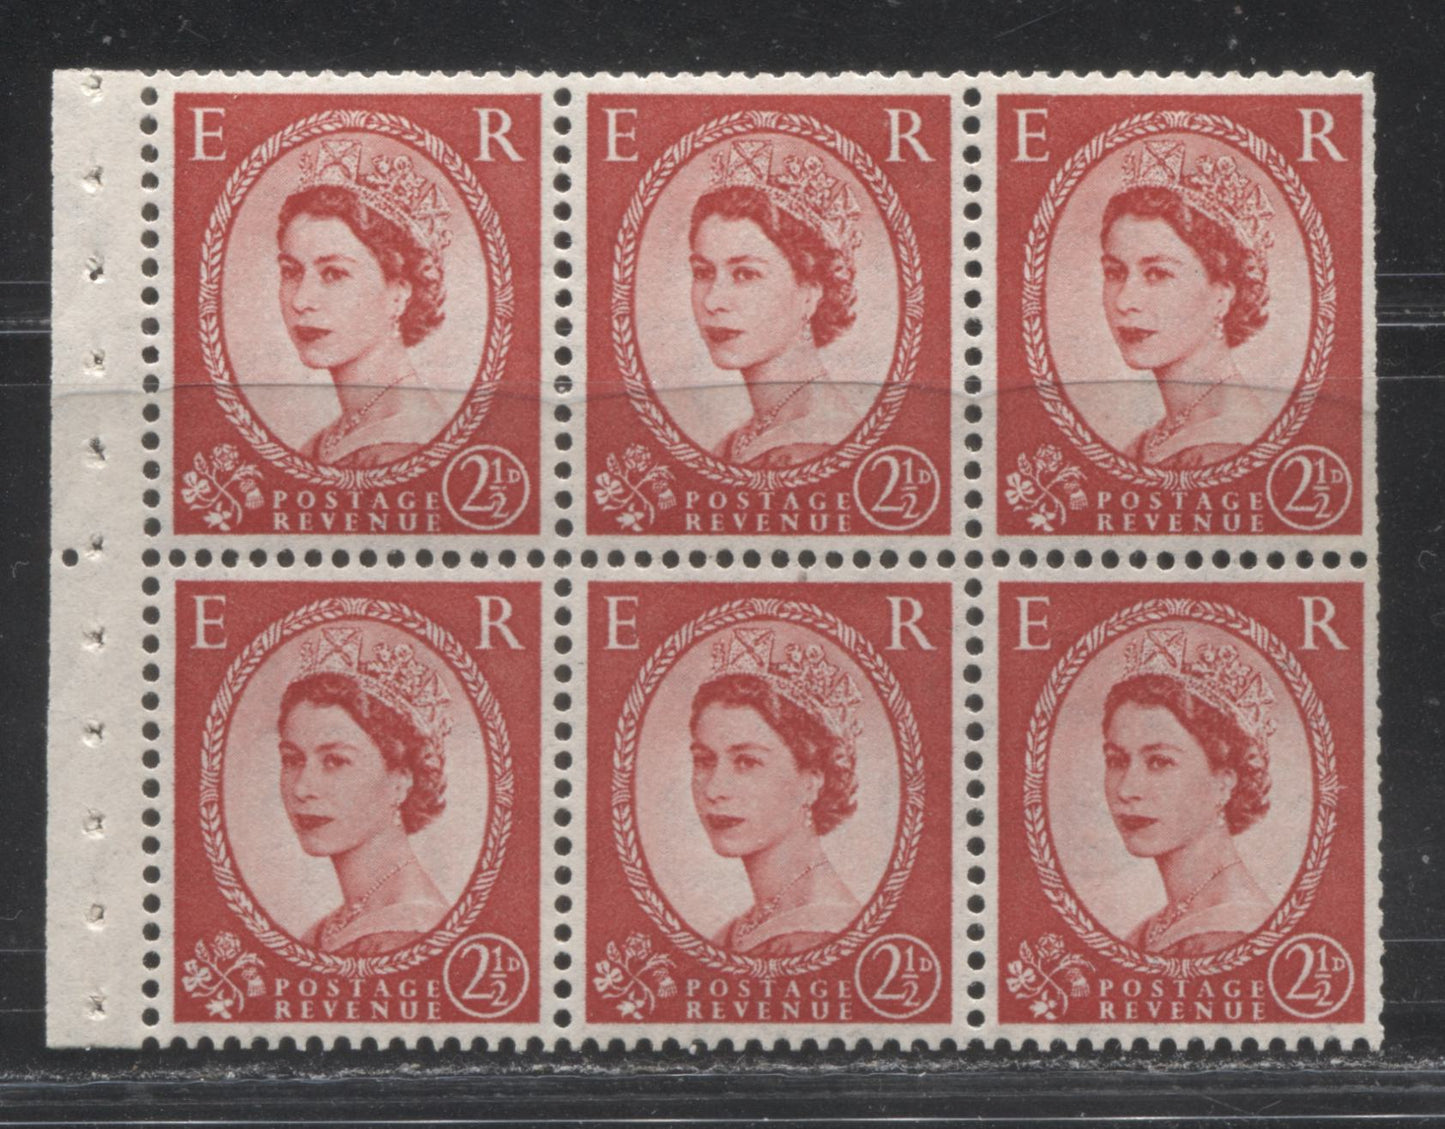 Great Britain SG#F24 2/6d Dull Green & Black Cover 1952-1955 Wilding Issue, A Complete Booklet With Upright & Inverted Tudor Crown Watermark, Panes of 6 and 3 + 3 Labels, Type B GPO Cypher, December 1954